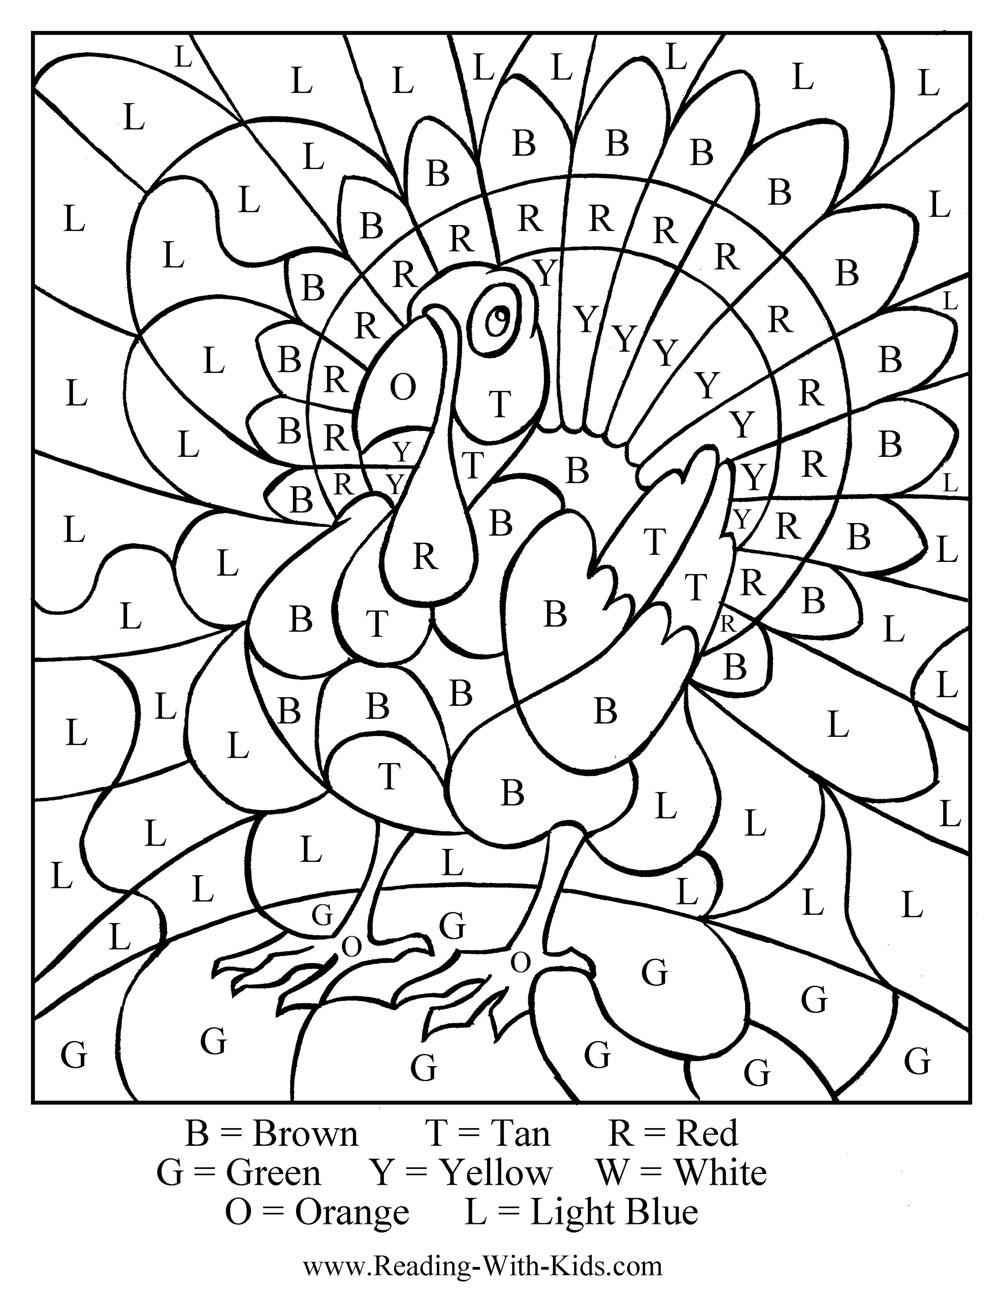 Free Printable Coloring Pages Turkey
 Free Thanksgiving Coloring Pages & Games Printables